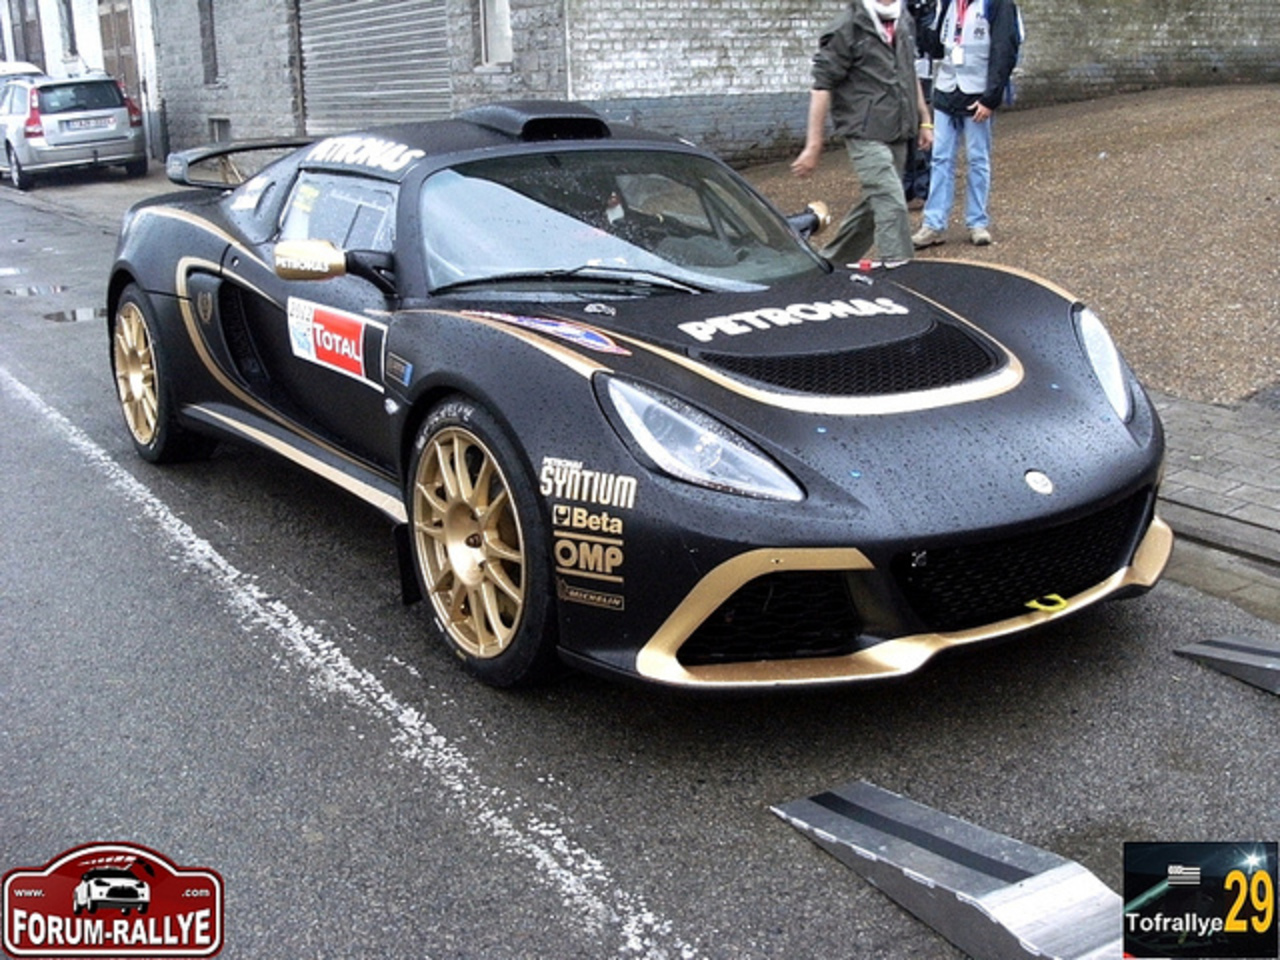 Ypres Rally 2012 - Lotus Exige R GT - Sousa | Flickr - Photo Sharing!